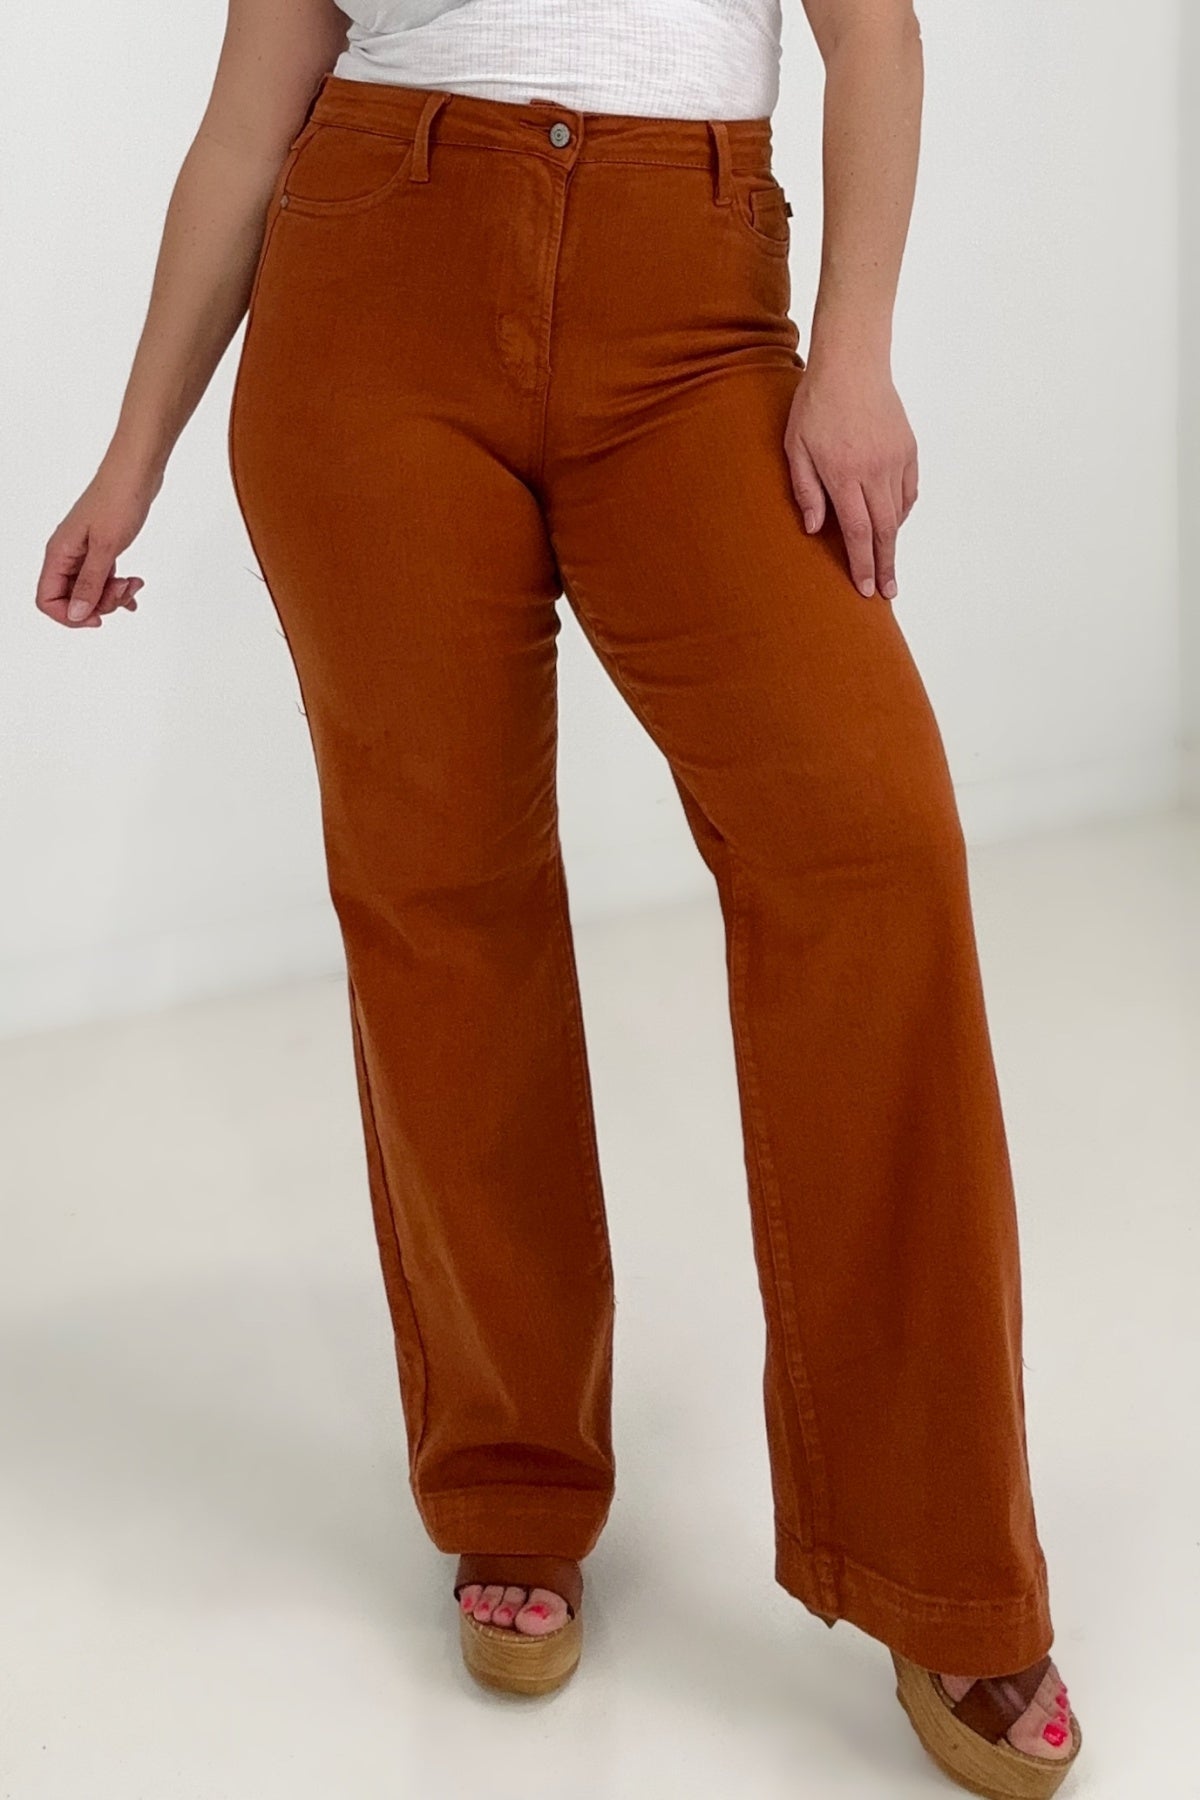 AUB ORANGE - Judy Blue High Waist Garment Dyed Wide Leg Jeans - Ships from The US - womens jeans at TFC&H Co.